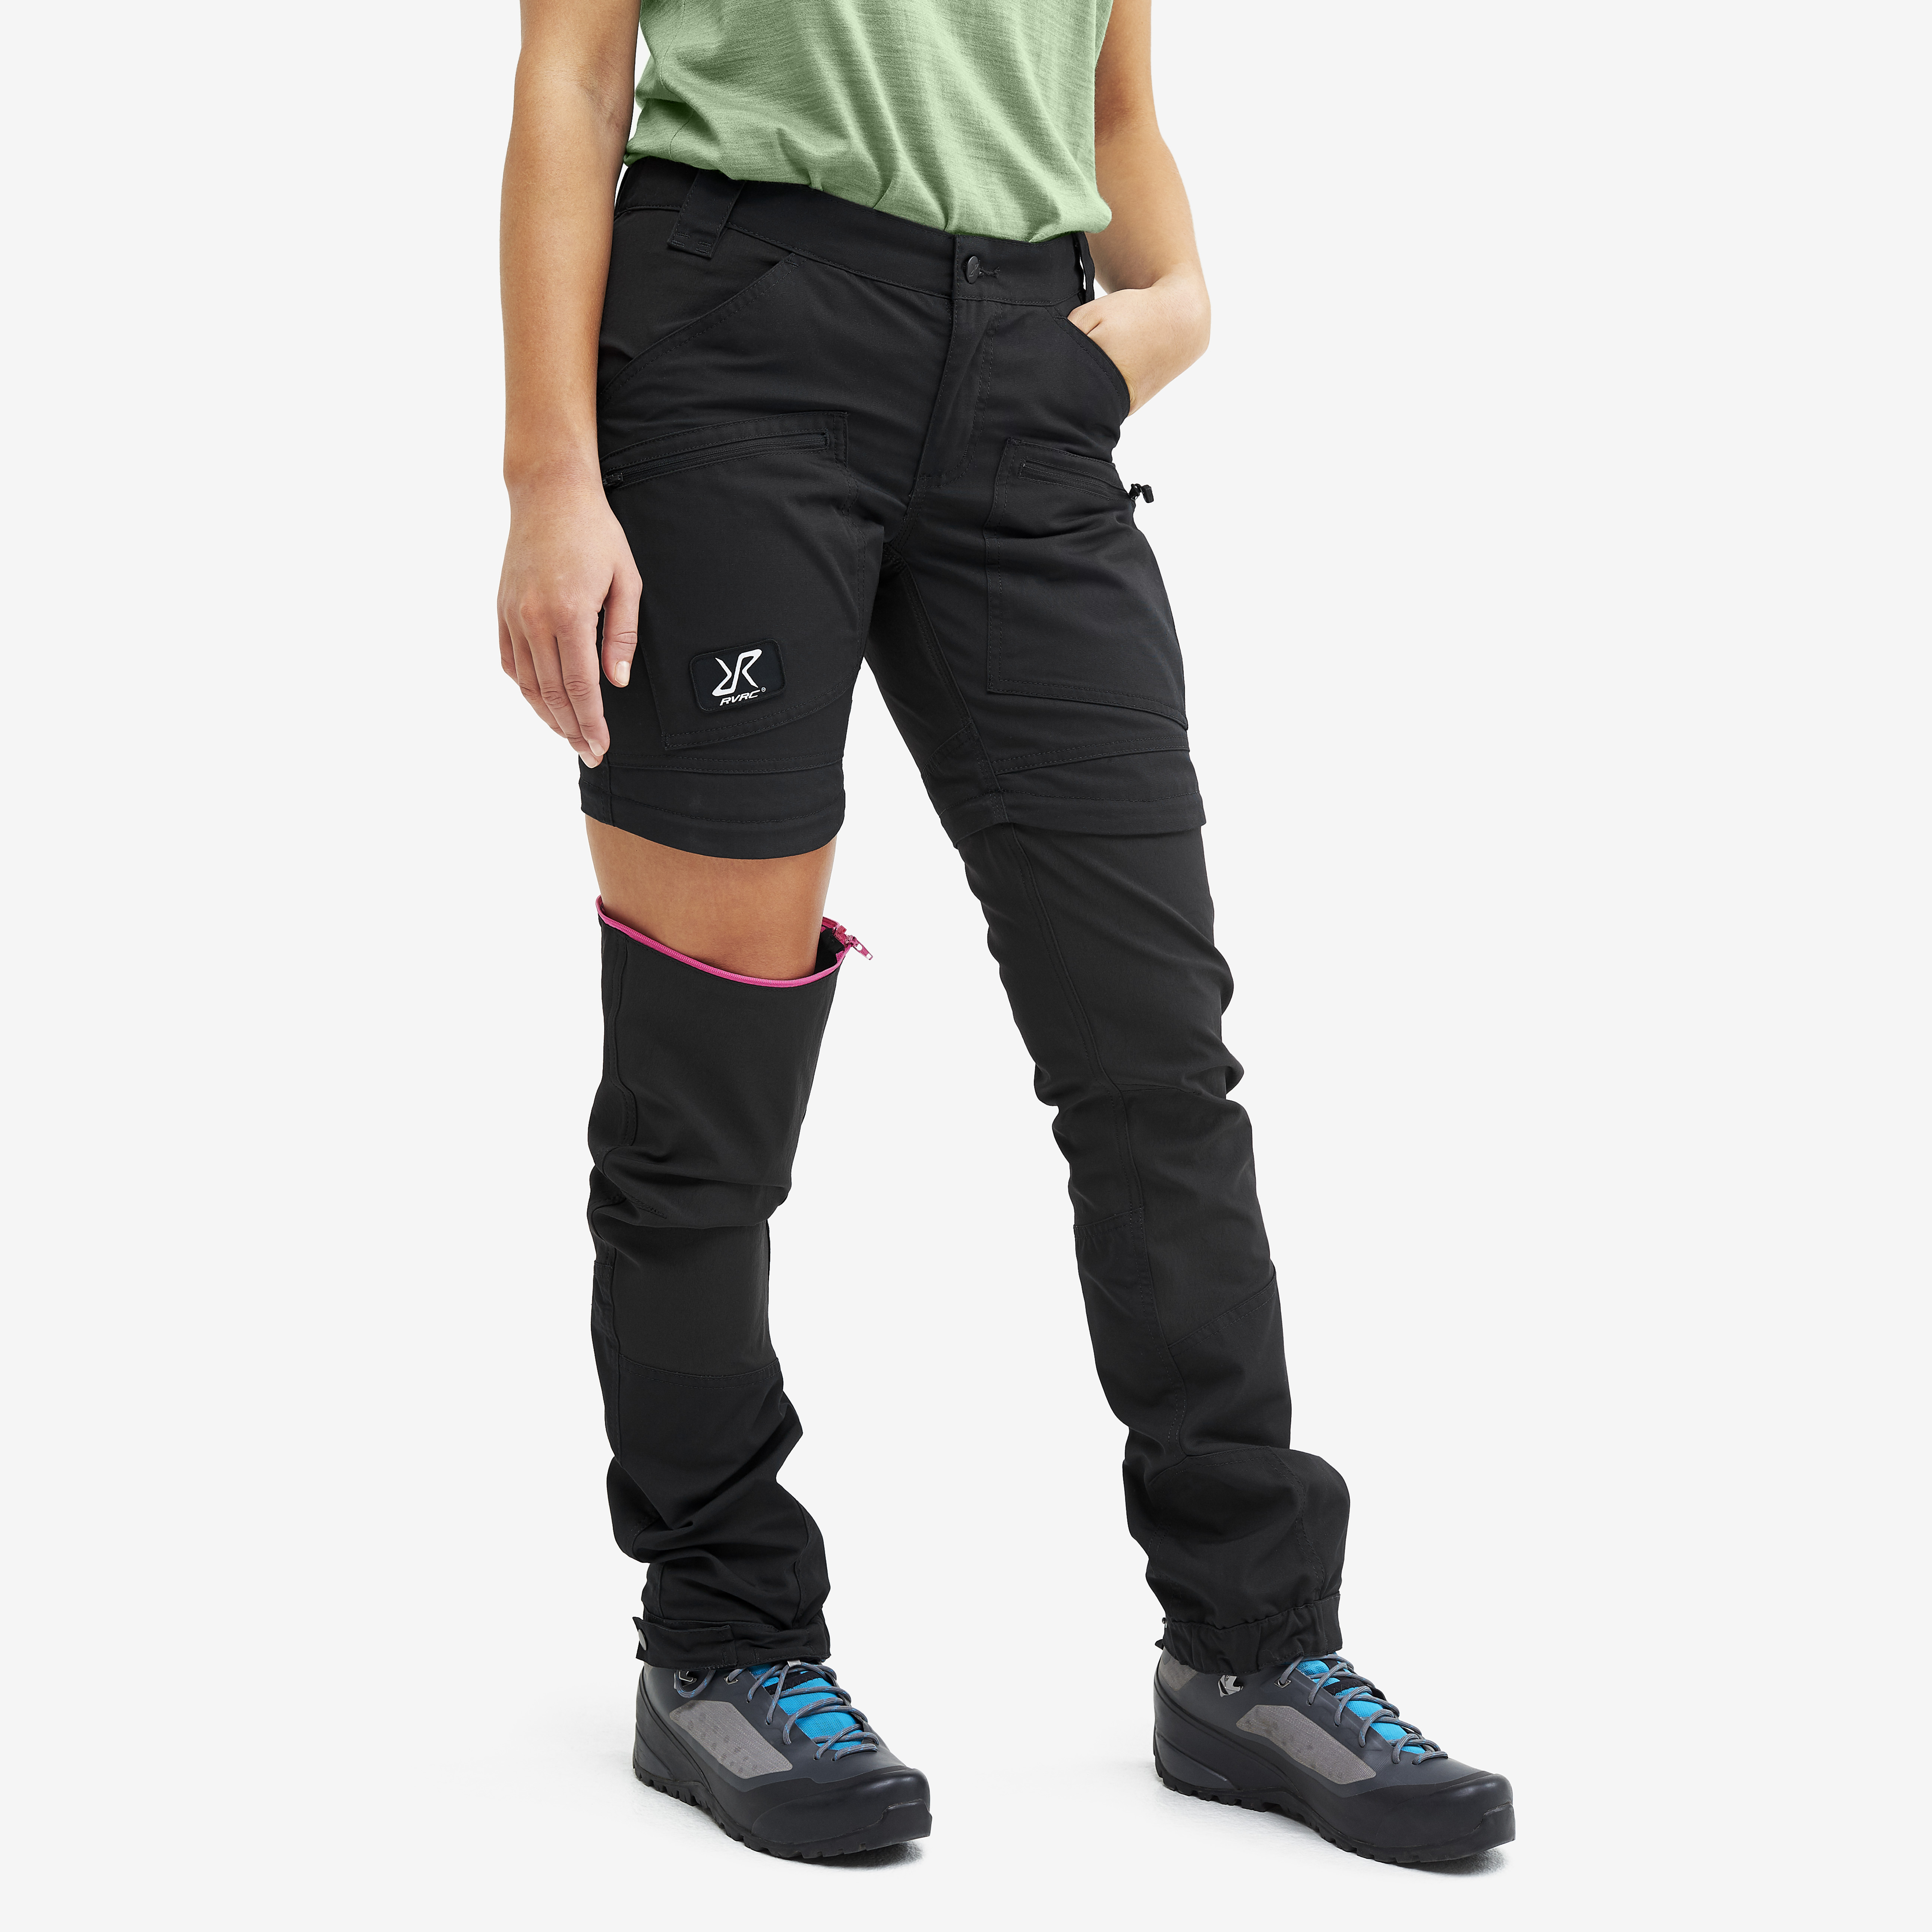 Nordwand Pro Zip-off hiking pants for women in black